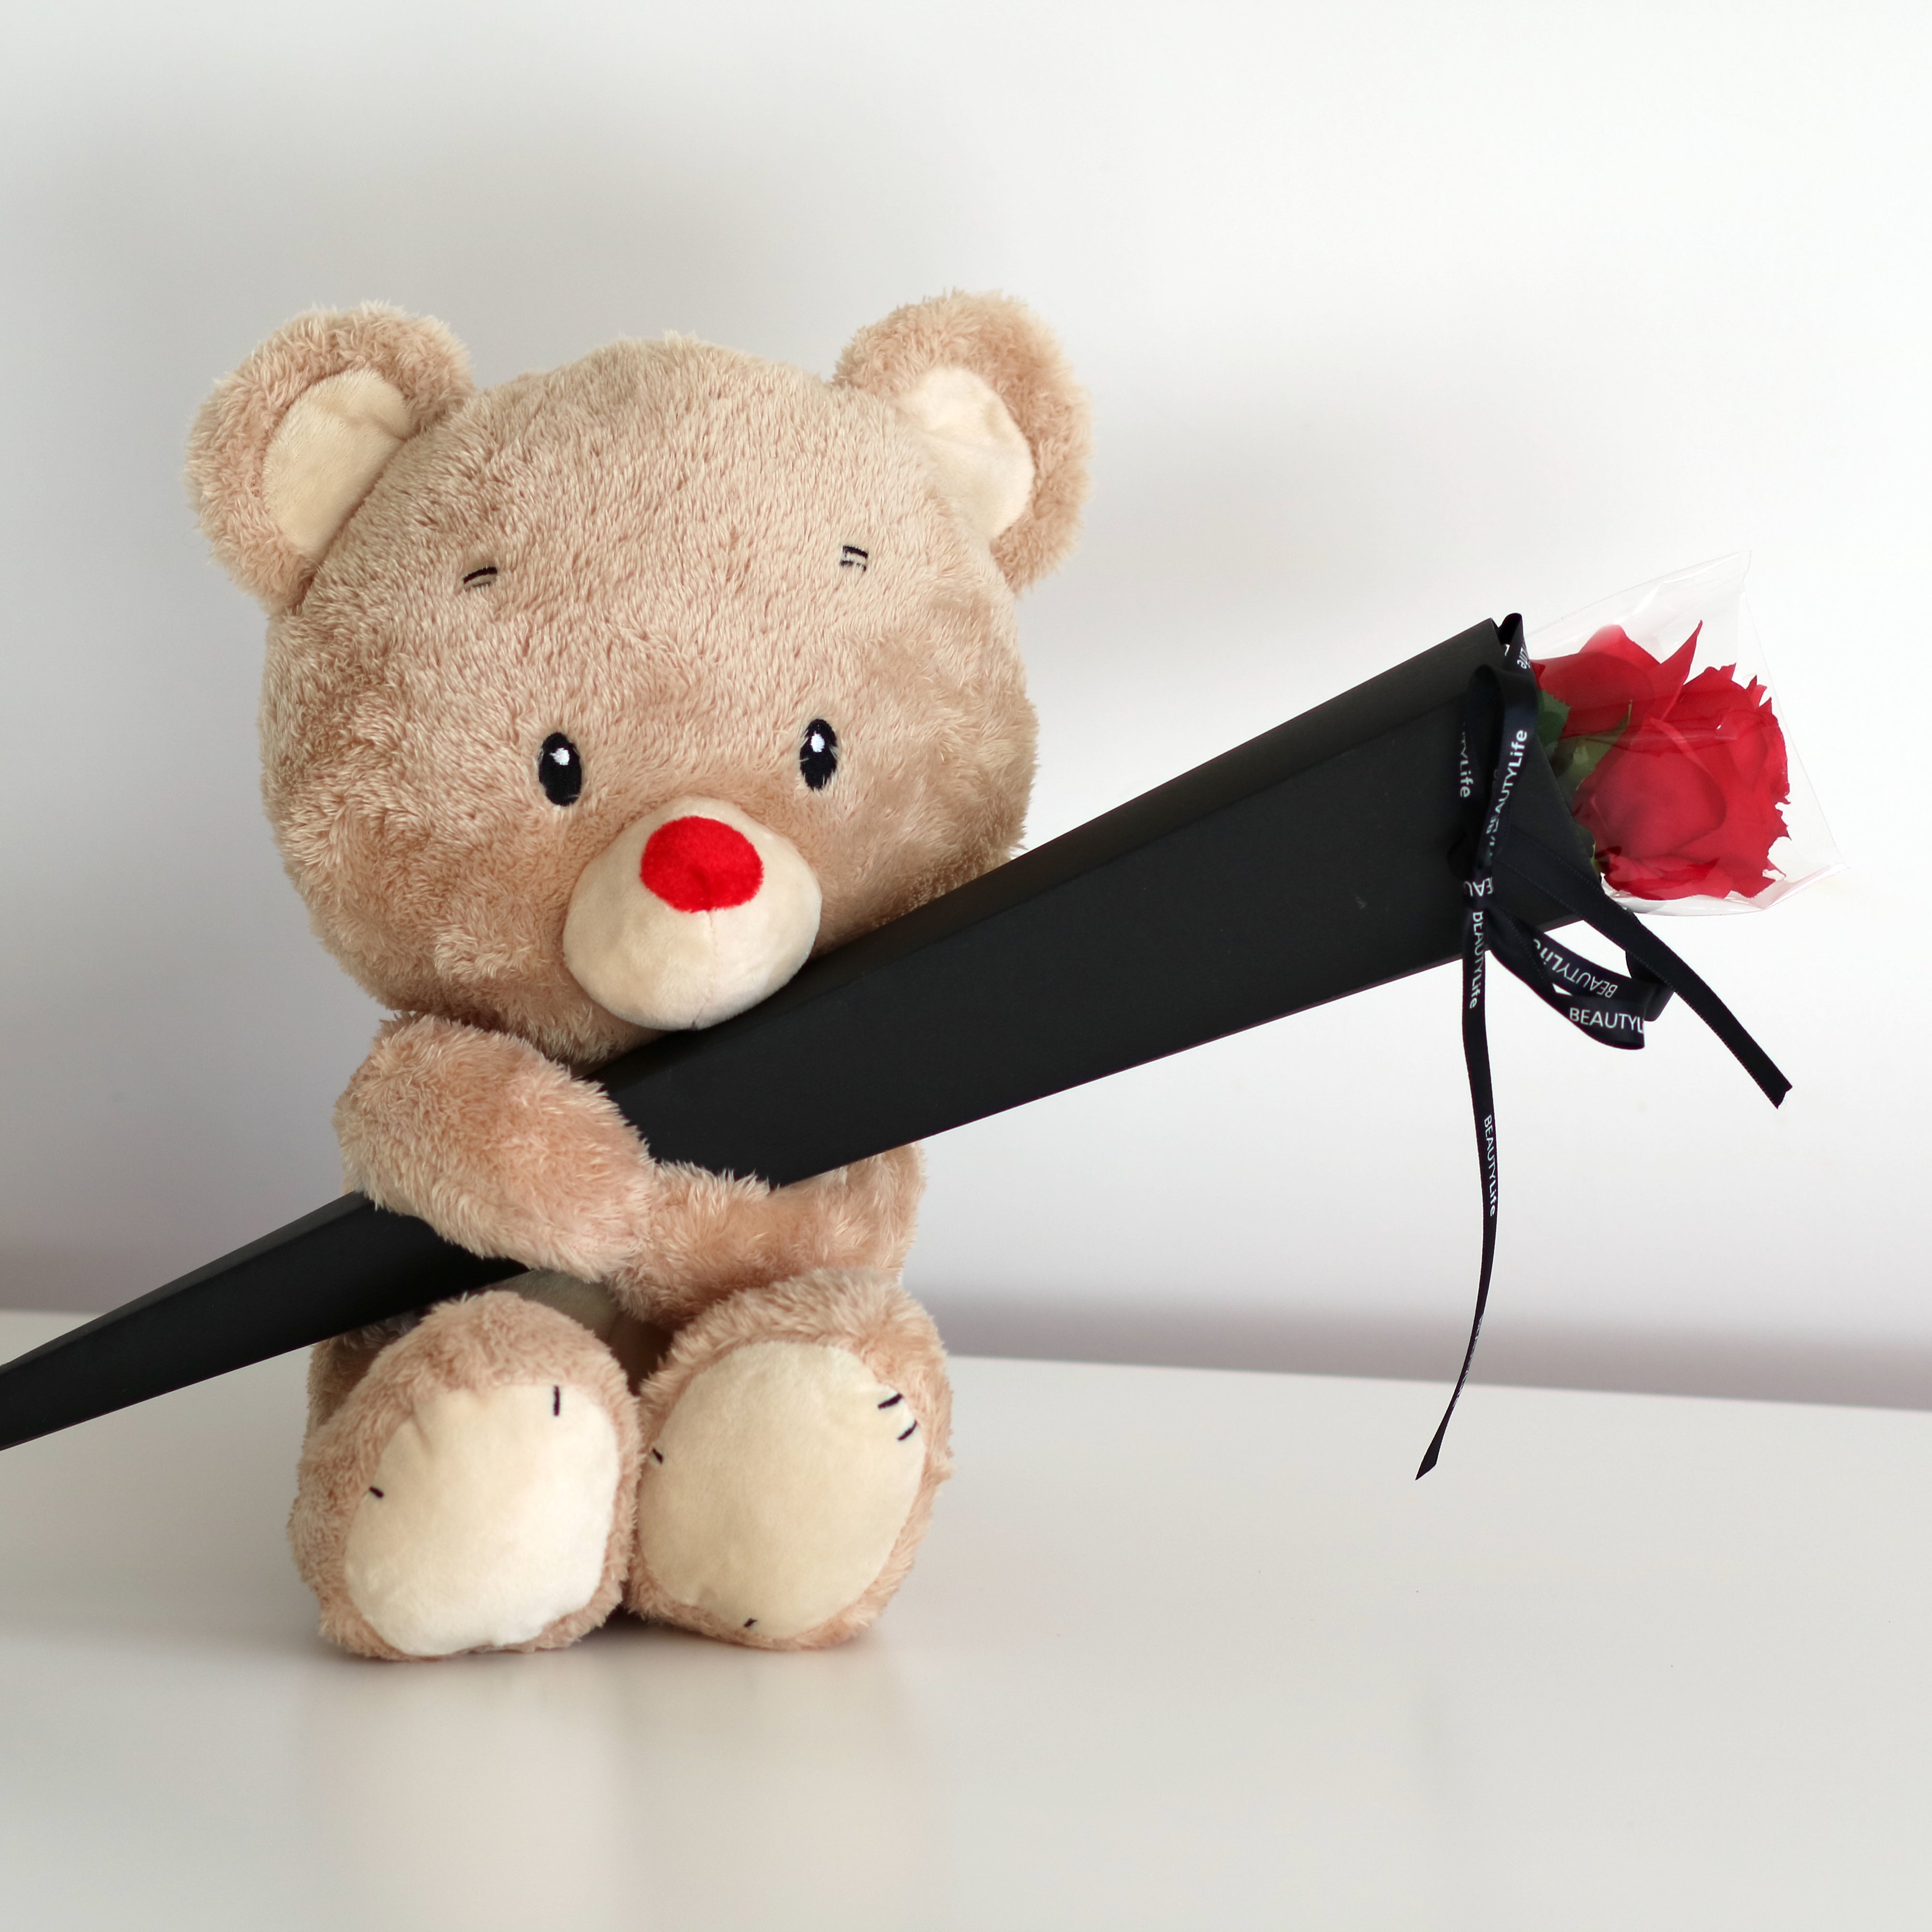 Adoration Bear and Silk Red Rose